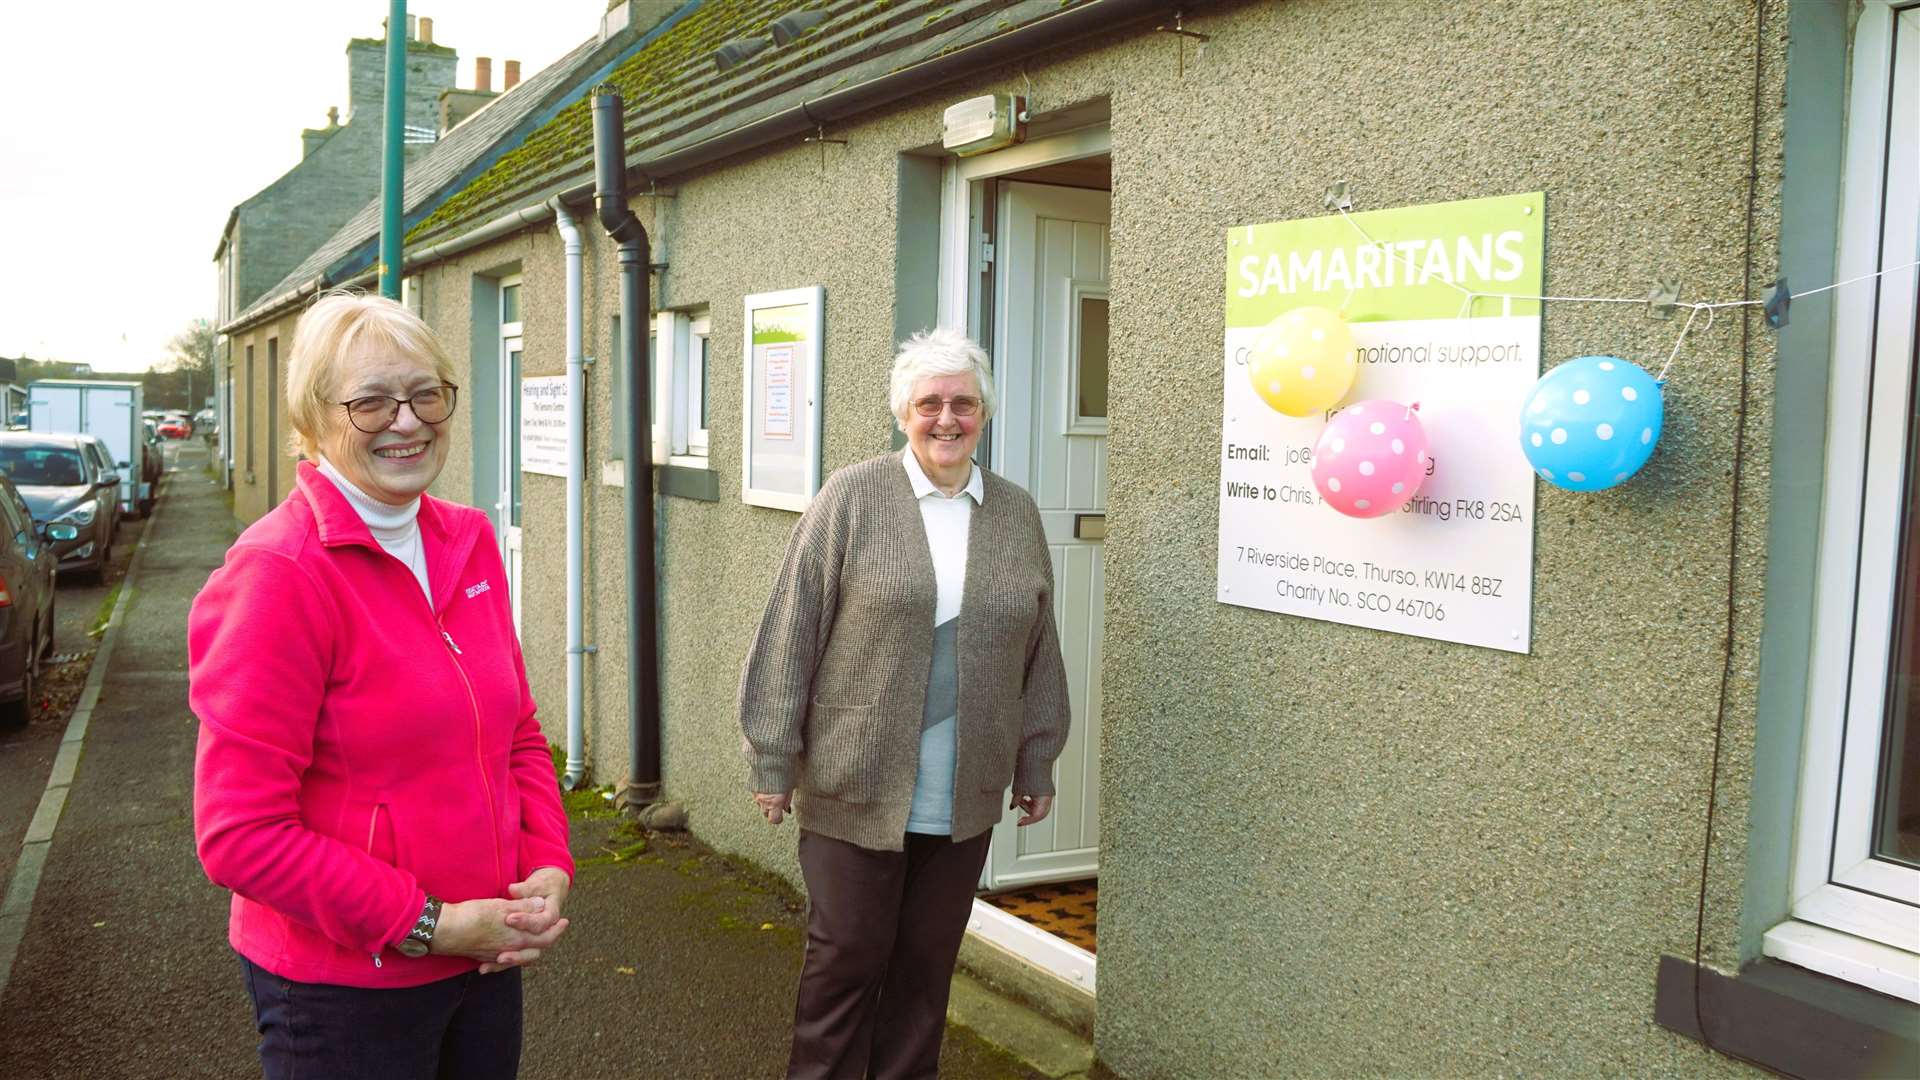 The Samaritans branch in Thurso had a special open day on Saturday morning. Barbara Bethell (left) is the incoming director of Thurso's Samaritans branch and Catherine Simpson who is current director. Picture: DGS